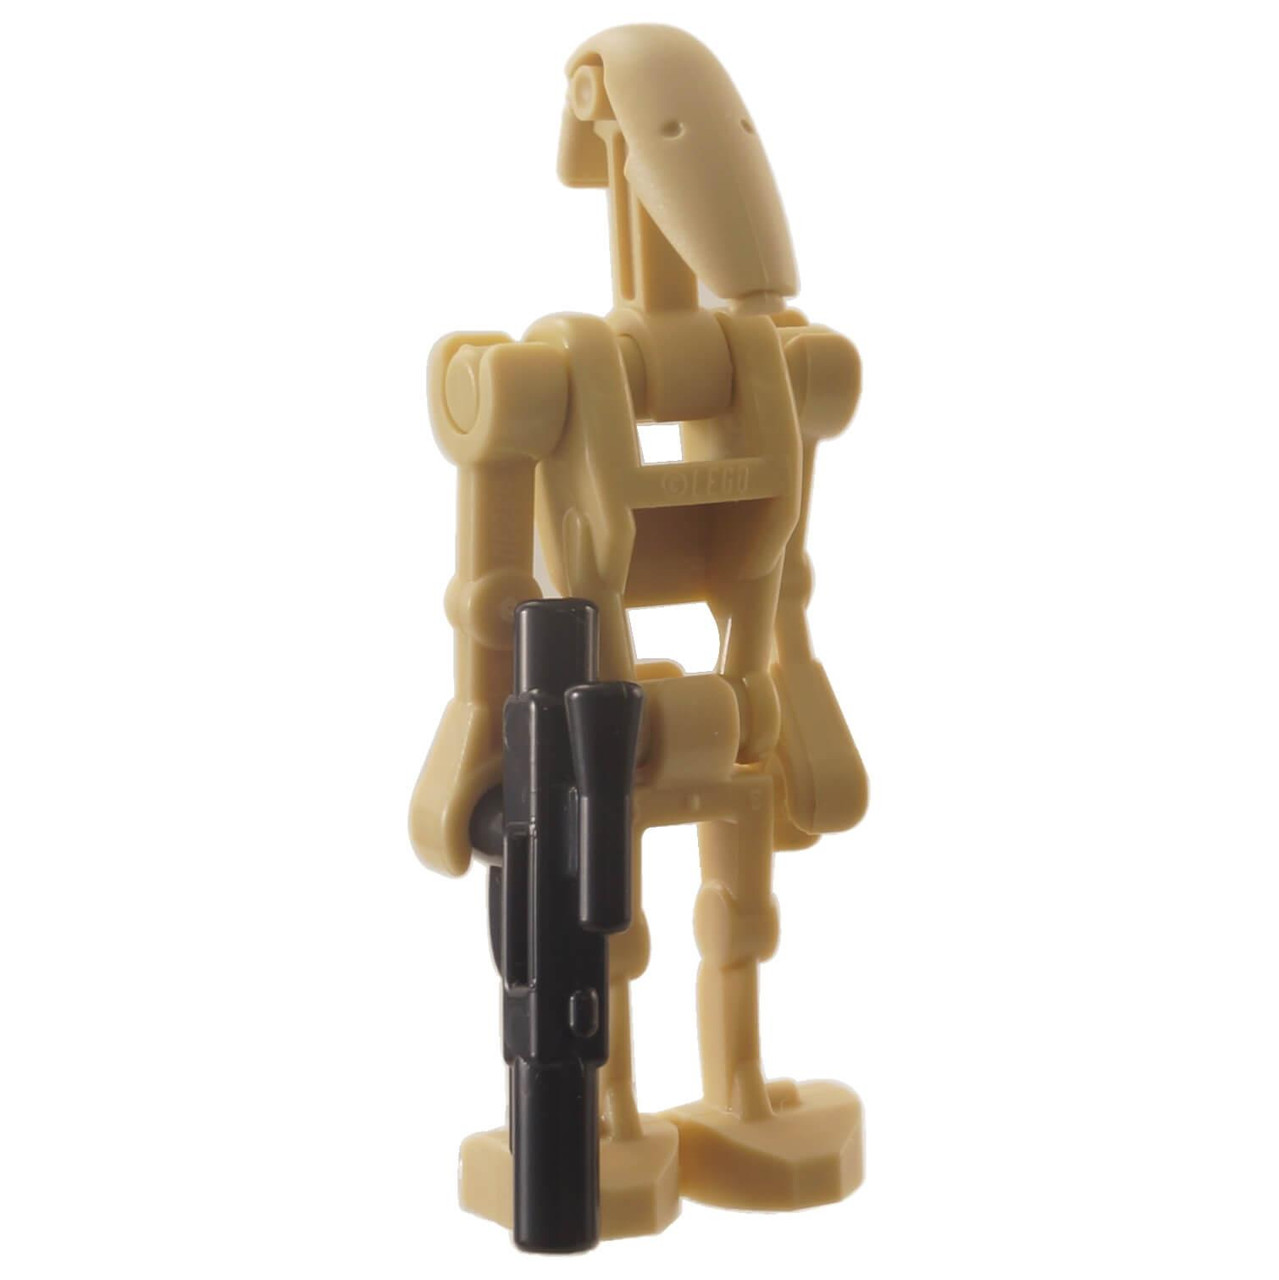 Lego Star Wars Battle Droid with One Straight Arm, Lego Minifigure, Lego  Minifig, Lego Starwars